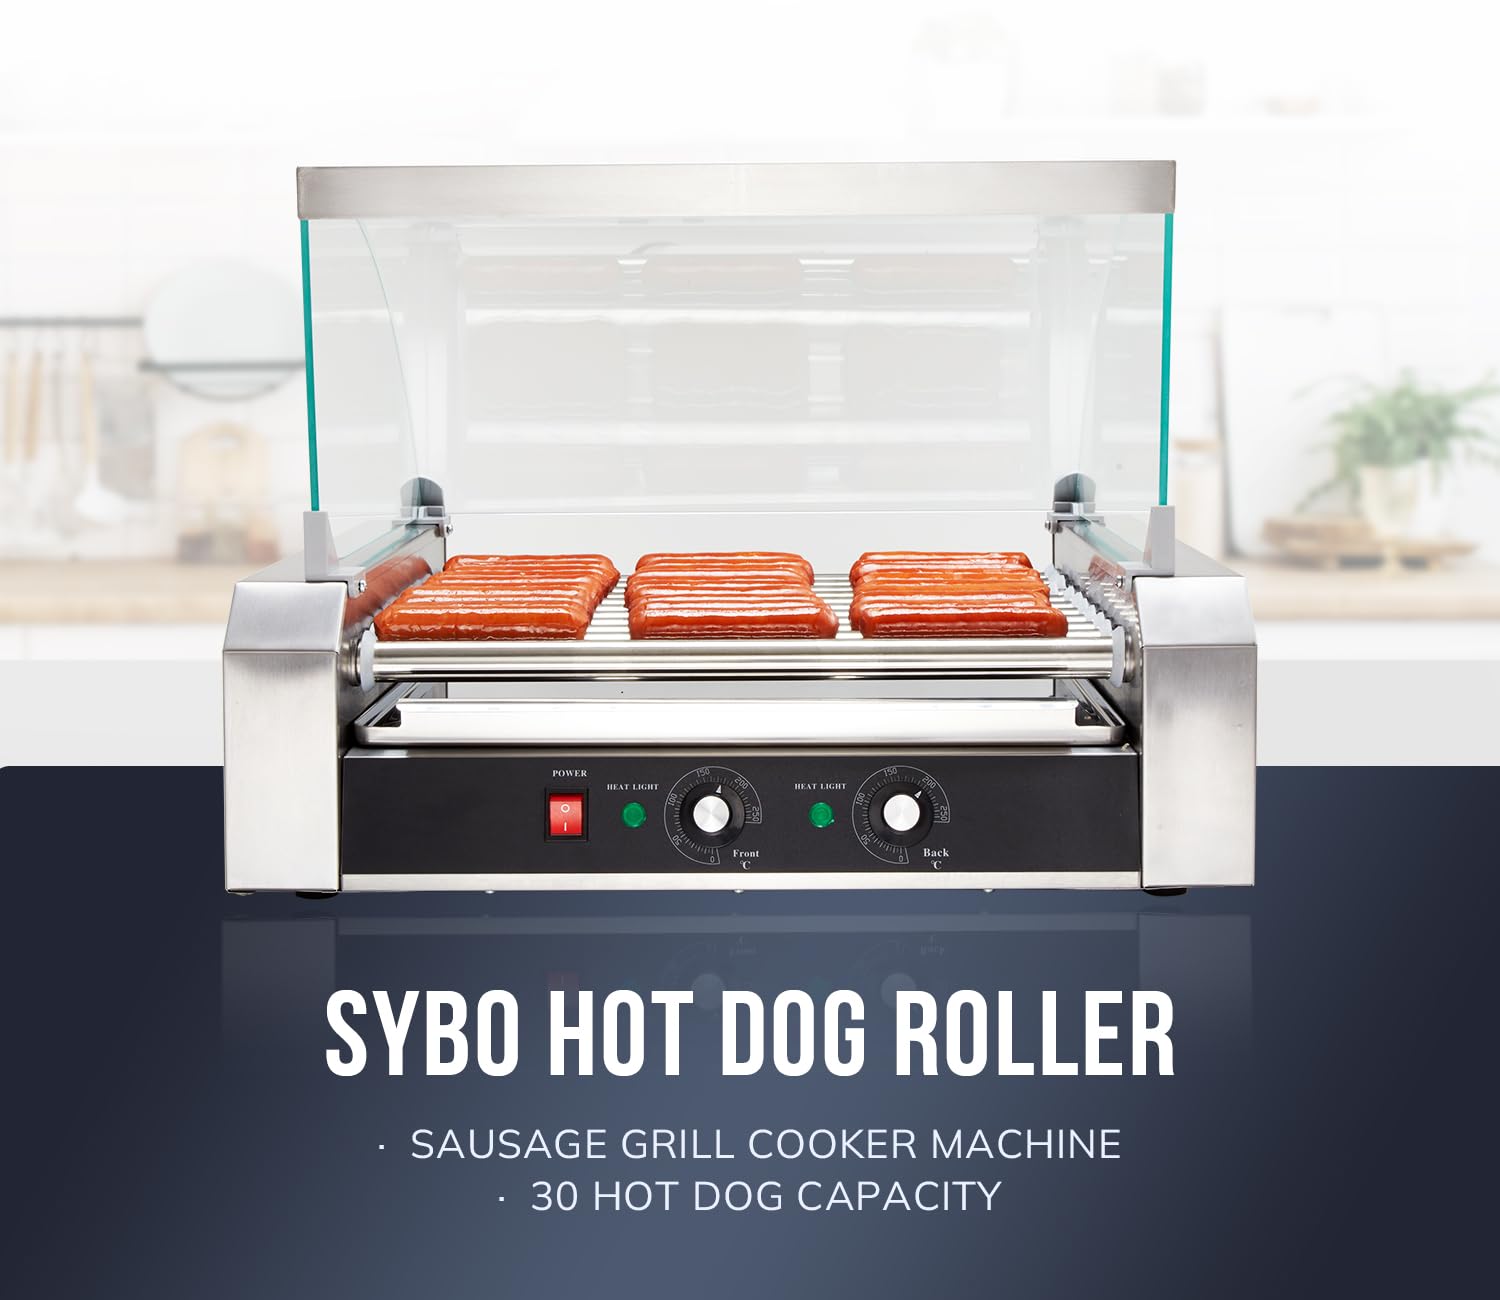 SYBO Hot Dog Roller, 30 Hot Dogs 11 Rollers Grill Cooker Machine with Removable Stainless Steel Drip Tray and Glass Hood Cover, 1430-Watts, Perfect for Commercial And Party